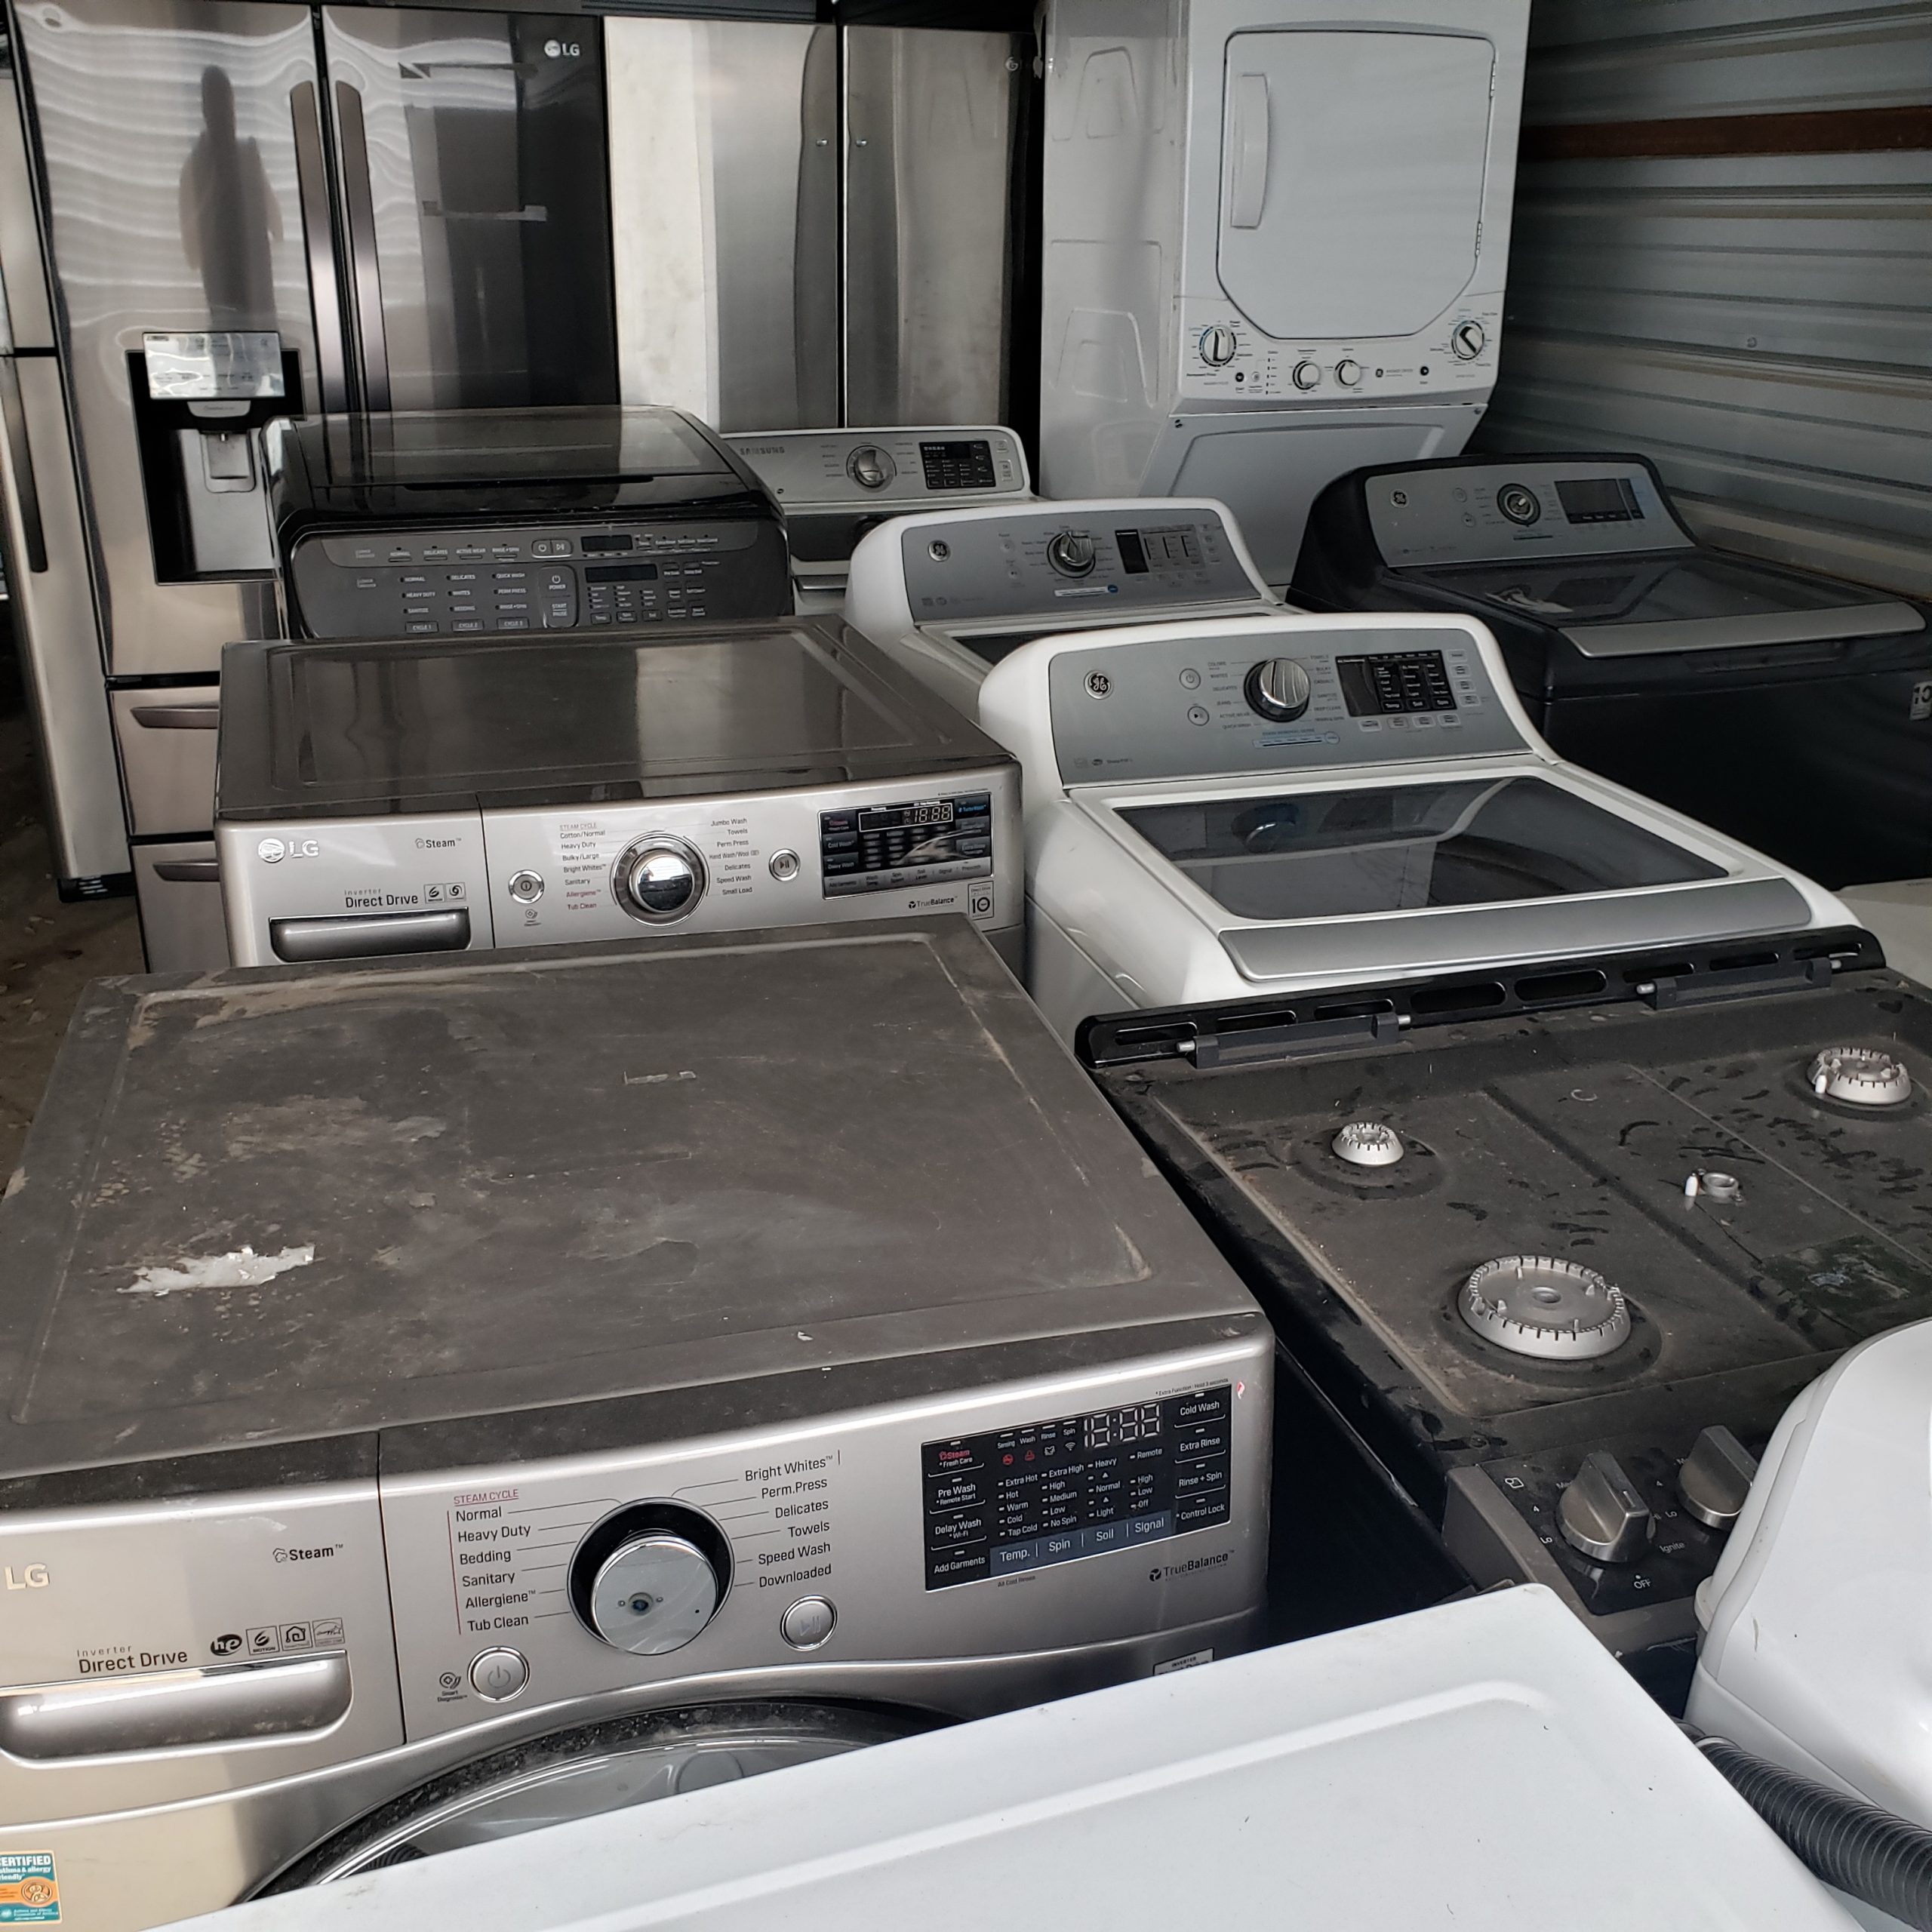 Salvage untested appliances for sale by the truckload in our wholesale liquidation program 15